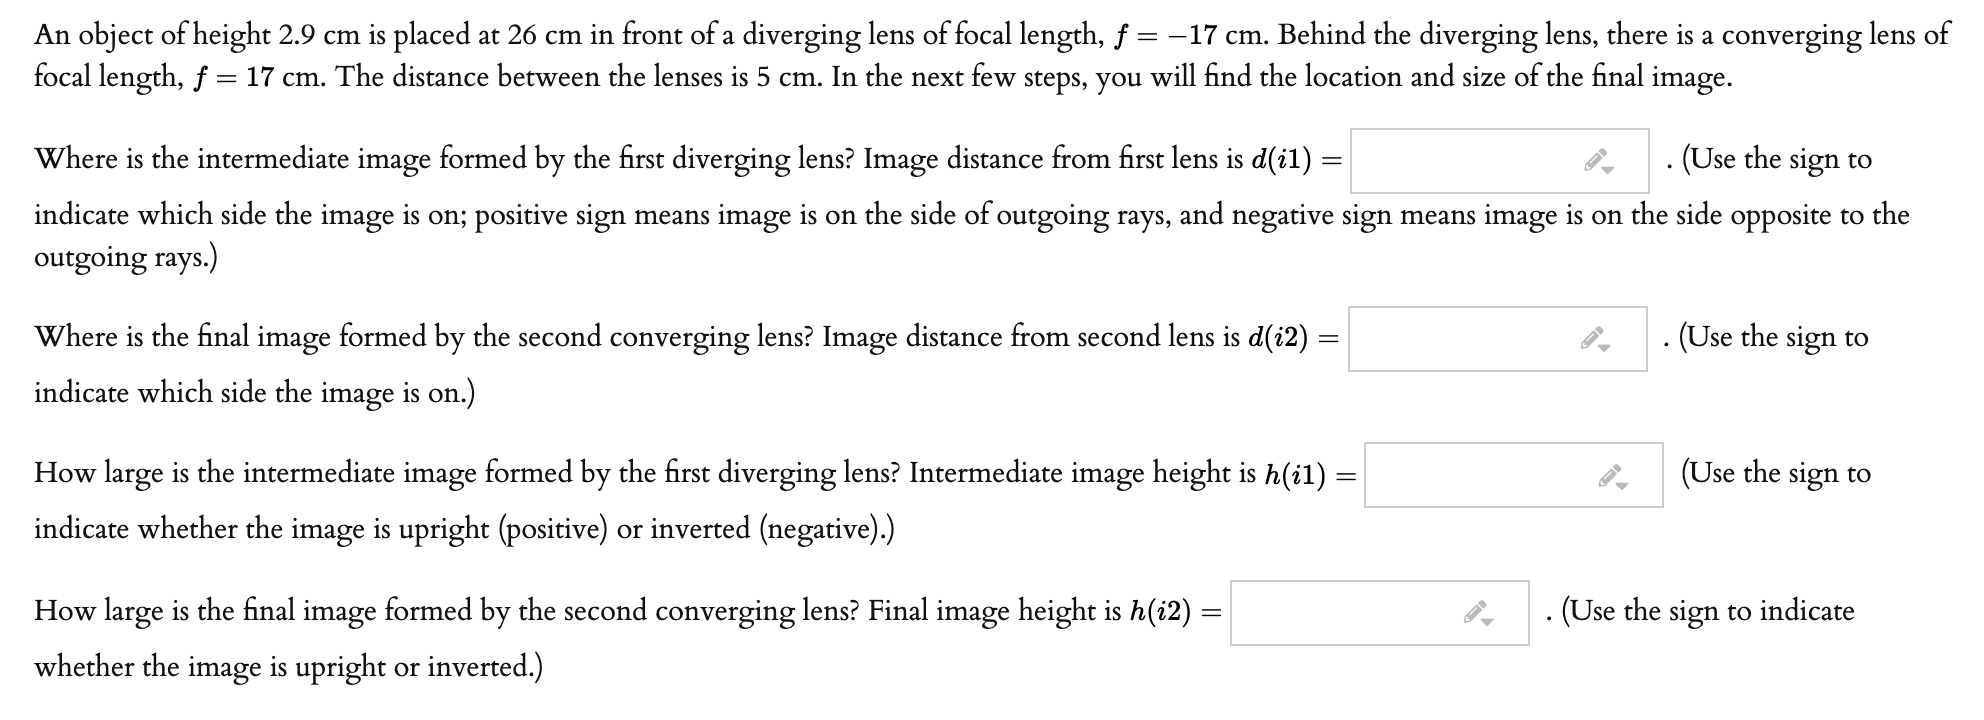 An object of height 2.9 cm is placed at 26 cm in front of a diverging lens of focal length, f = –17 cm. Behind the diverging lens, there is a converging lens of
focal length, f = 17 cm. The distance between the lenses is 5 cm. In the next few steps, you will find the location and size of the final image.
Where is the intermediate image formed by the first diverging lens? Image distance from first lens is d(i1) =
. (Use the sign to
indicate which side the image is on; positive sign means image is on the side of outgoing rays, and negative sign means image is on the side opposite to the
outgoing rays.)
Where is the final image formed by the second converging lens? Image distance from second lens is d(i2) =
(Use the sign to
indicate which side the image is on.)
How large is the intermediate image formed by the first diverging lens? Intermediate image height is h(i1) =
(Use the sign to
indicate whether the image is upright (positive) or inverted (negative).)
How large is the final image formed by the second converging lens? Final image height is h(i2)
. (Use the sign to indicate
whether the image is upright or inverted.)
